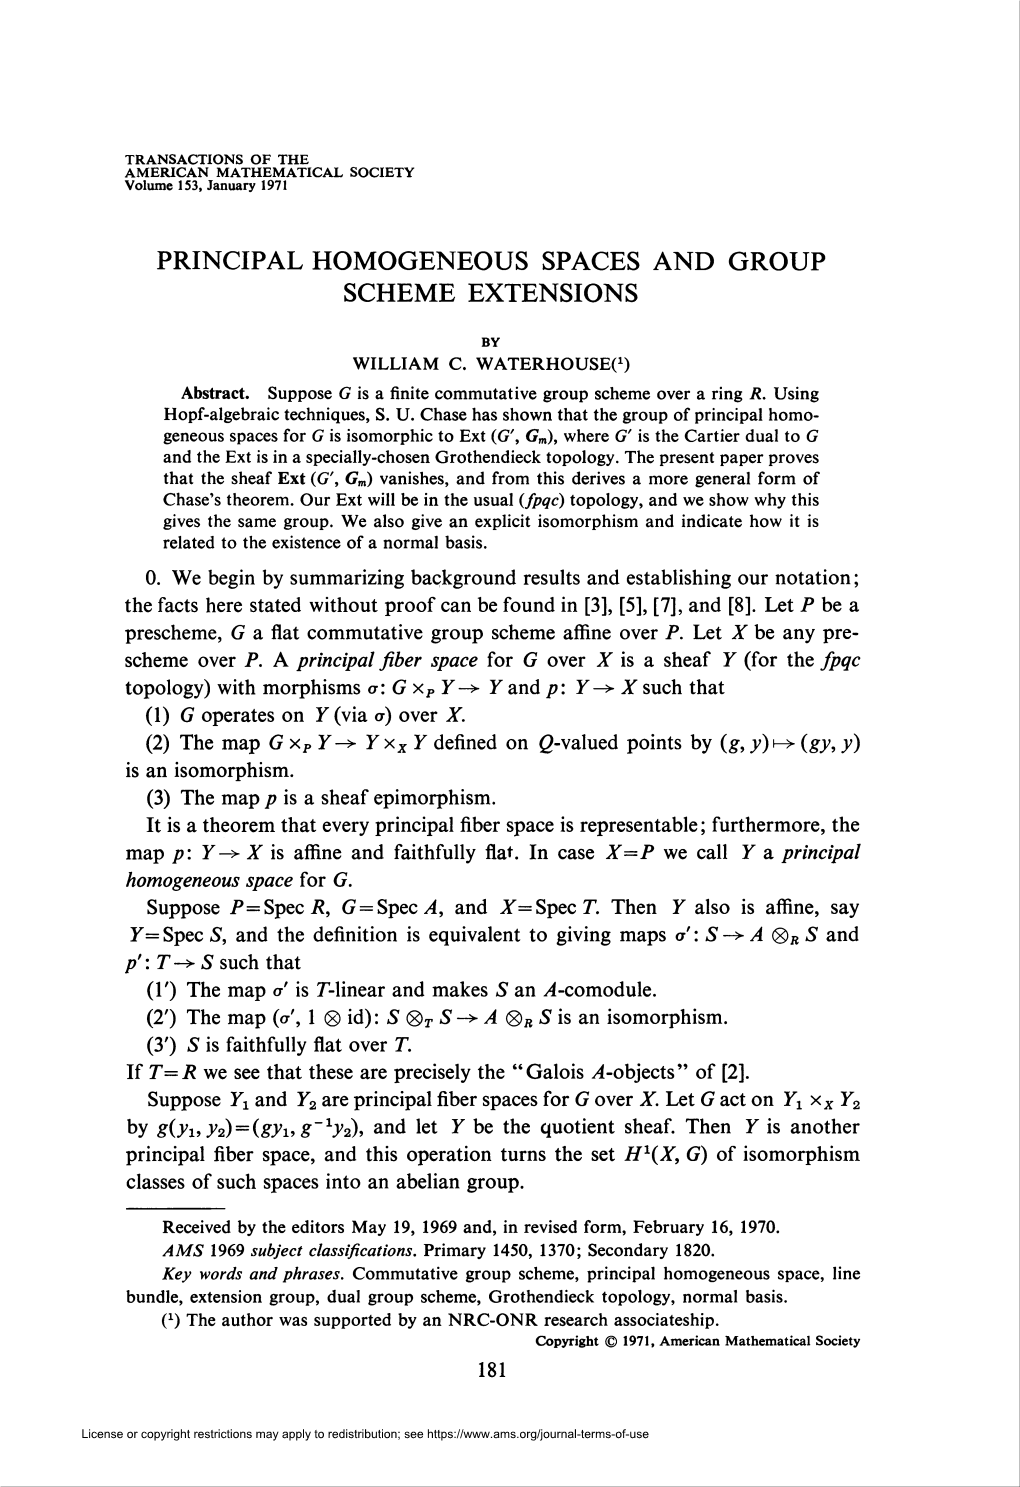 Principal Homogeneous Spaces and Group Scheme Extensions